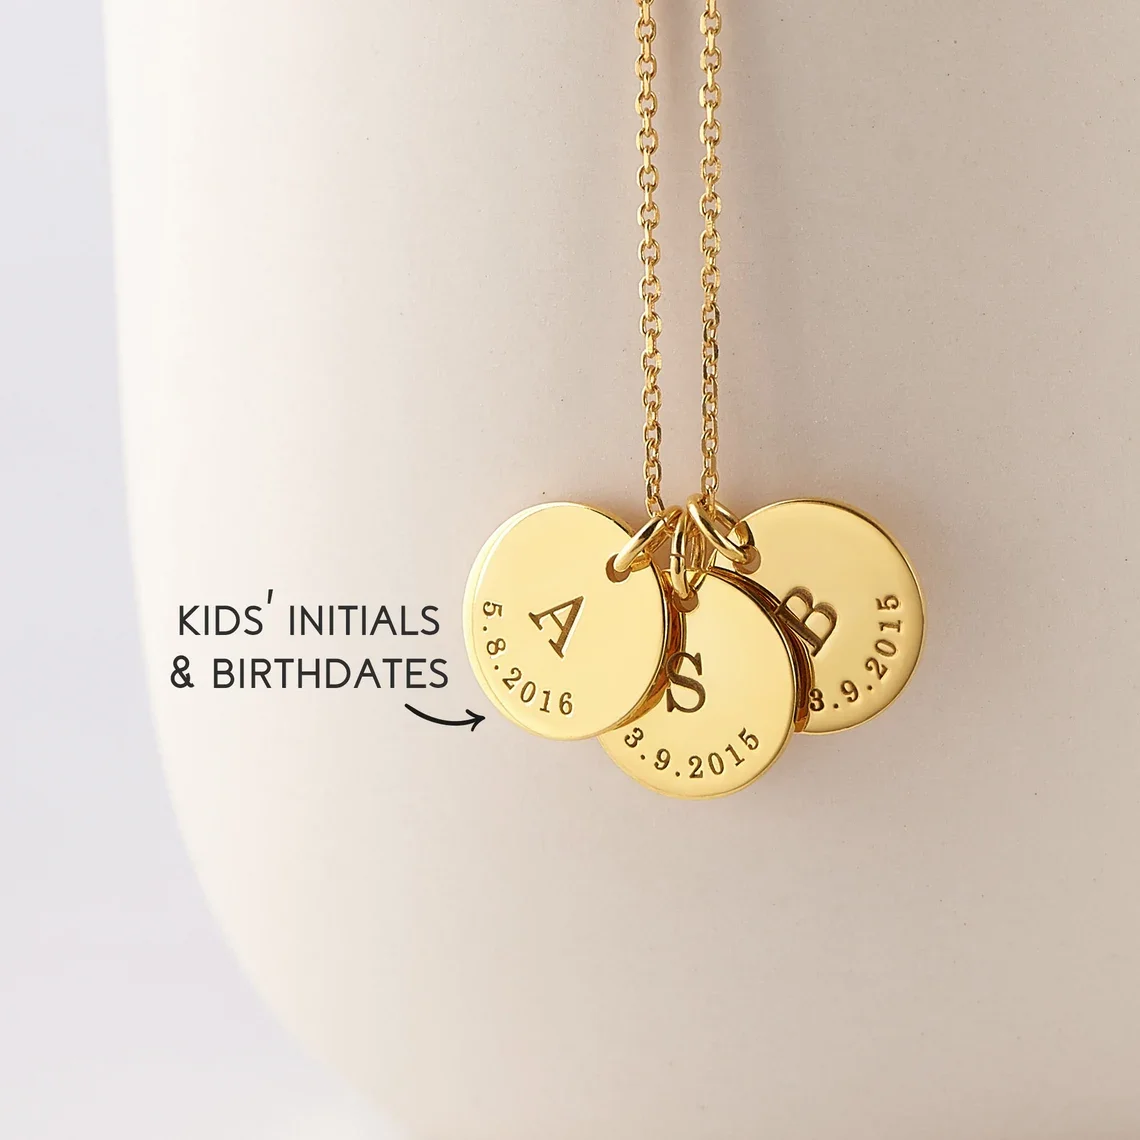 Personalized  Children's Initials Necklace Silver Mom Necklace Kids Initials Necklace For Mom   Jewelry Mothers Day Gift fashion letter baby straw hat children panama caps kids kids initials letter fisherman cap beach cap girls boys sun hats